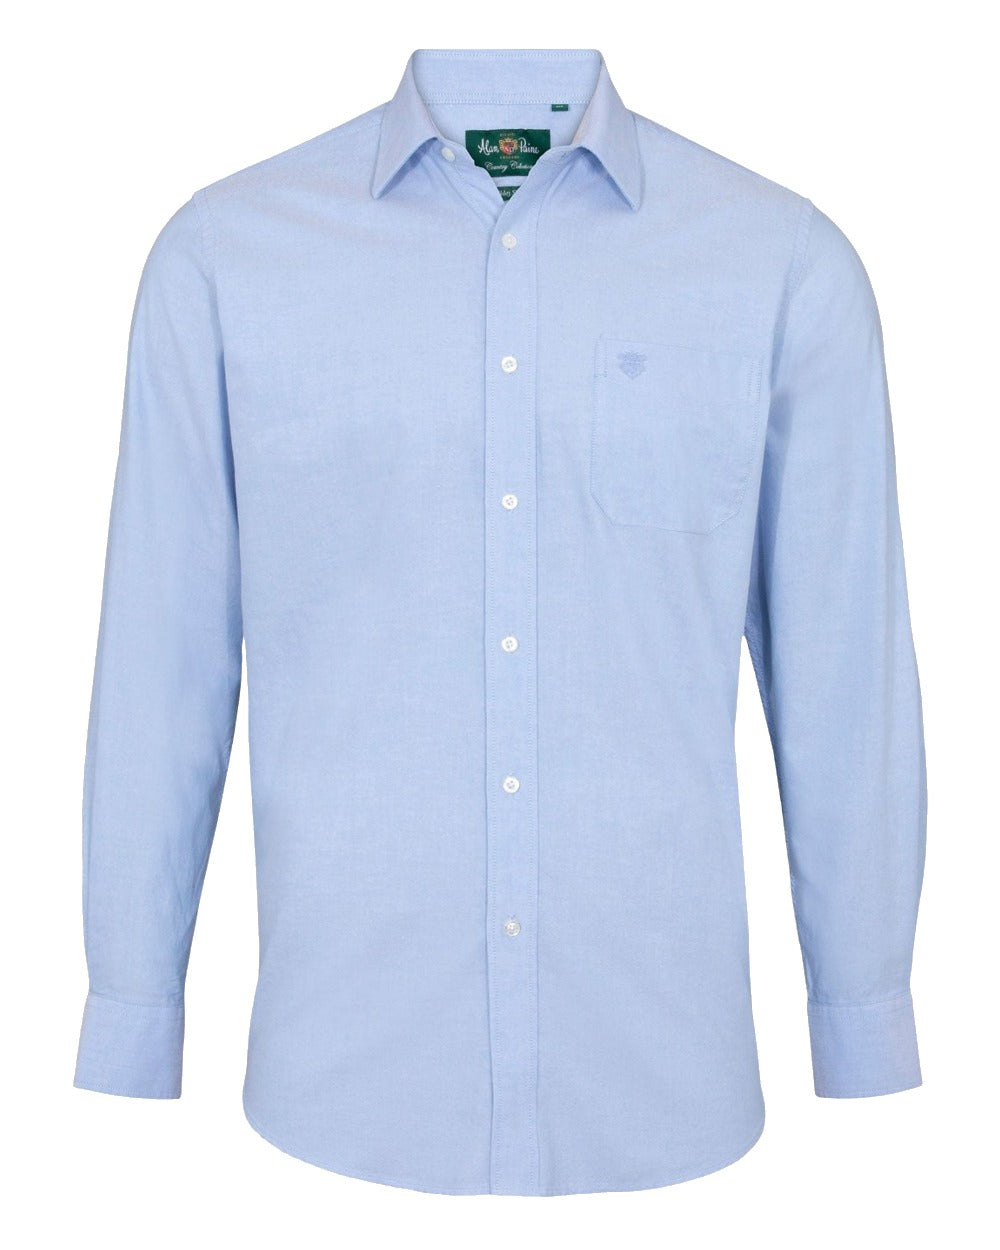 Alan Paine Ilkley Shirt in Oxford Blue 